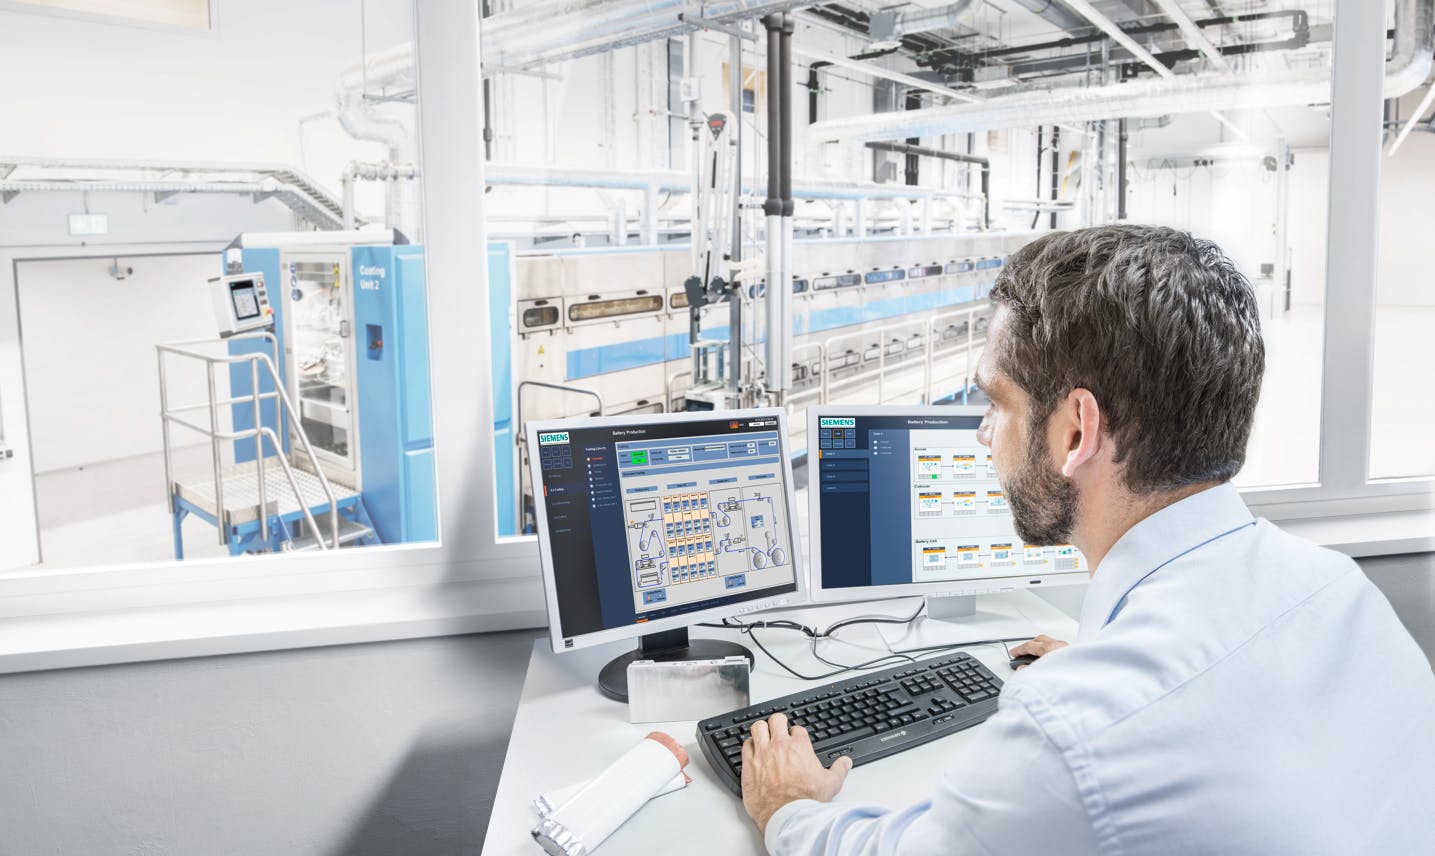 Boost battery manufacturing efficiency with Siemens' integrated MOM software. Scale production, optimize quality, and meet regulations confidently. Learn more in this webinar!